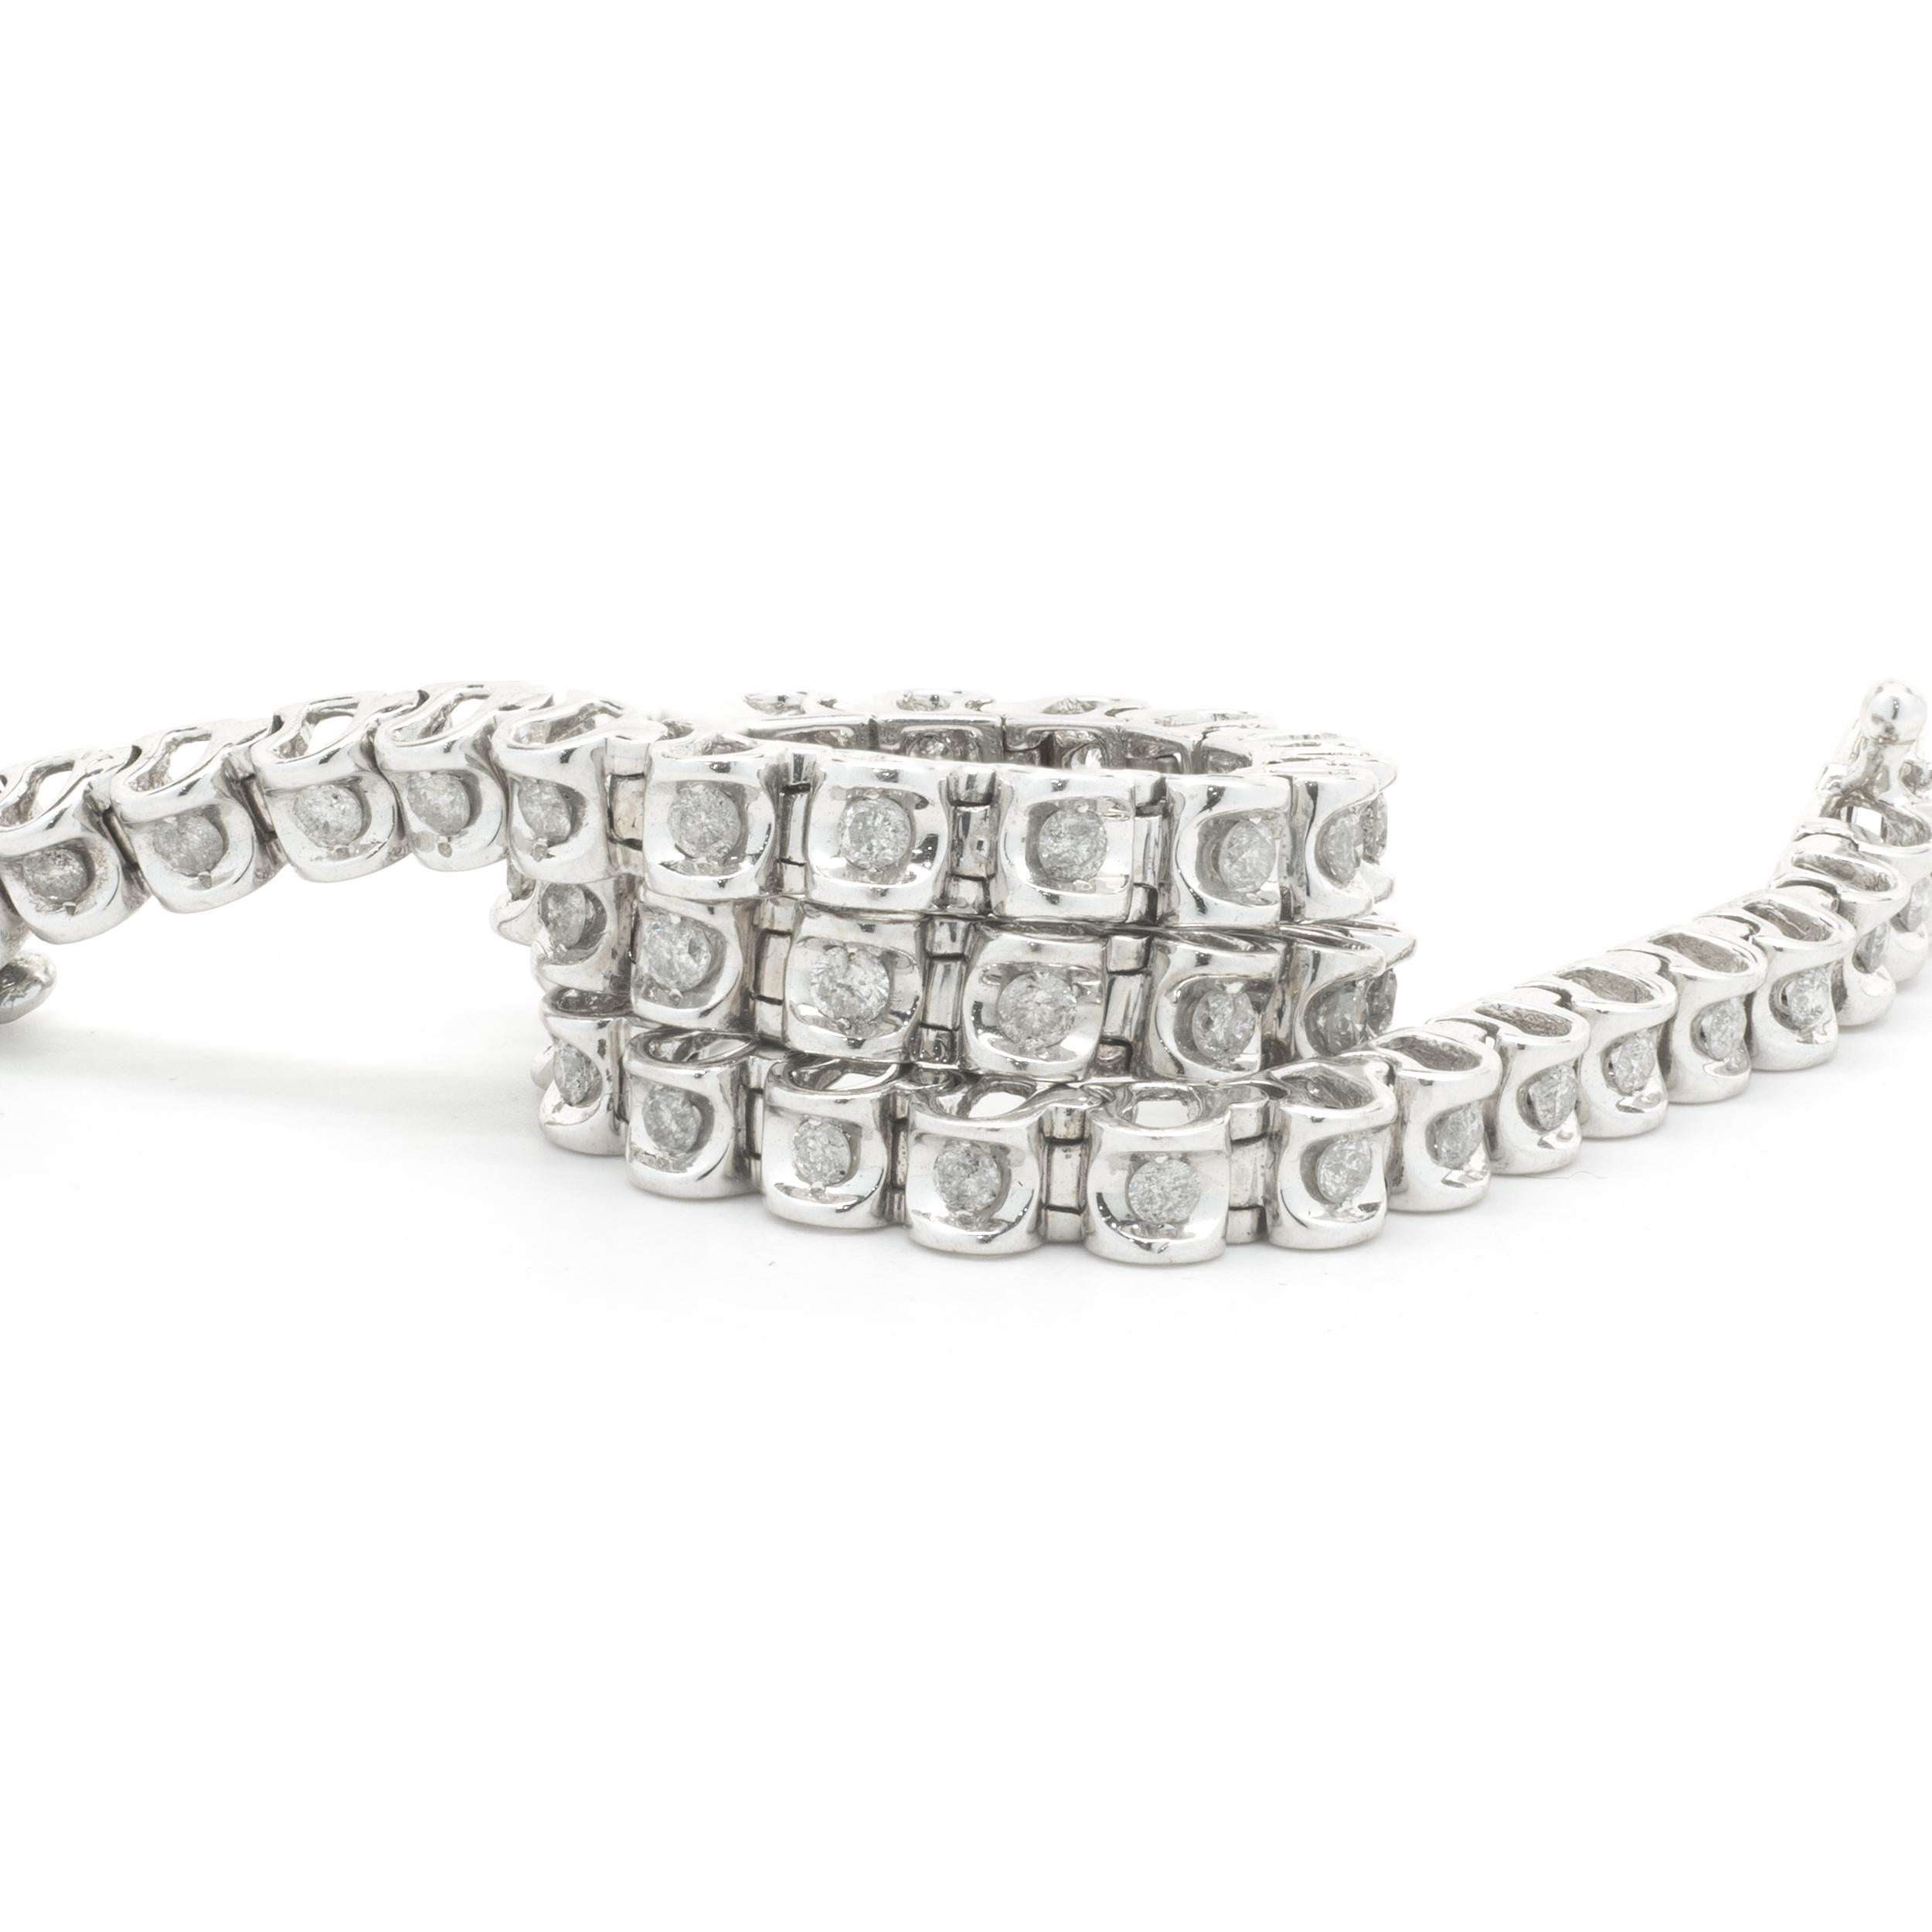 Designer: custom
Material: 14K white gold
Diamonds: 49 round cut = 1.00cttw
Color: I
Clarity: I1
Dimensions: bracelet measures 7.25-inches long  
Weight: 11.69 grams
